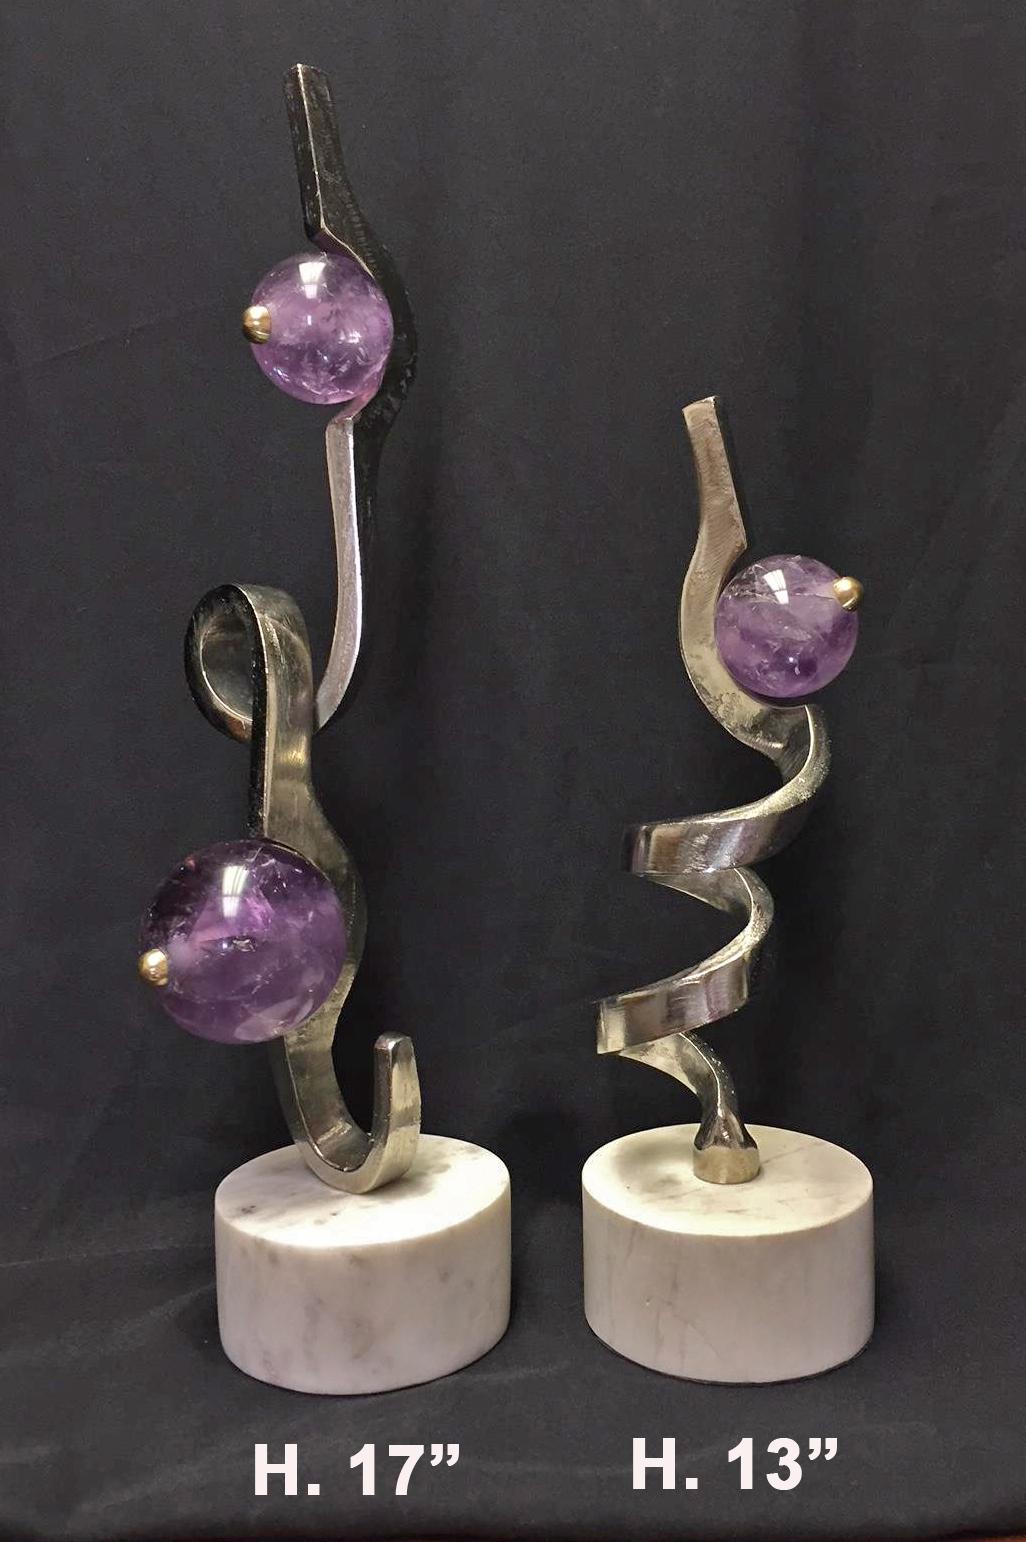 Unique set of two Modern style Amethyst Quartz and chrome table article sculptures on round marble bases.

Small table article dimensions: Height 13